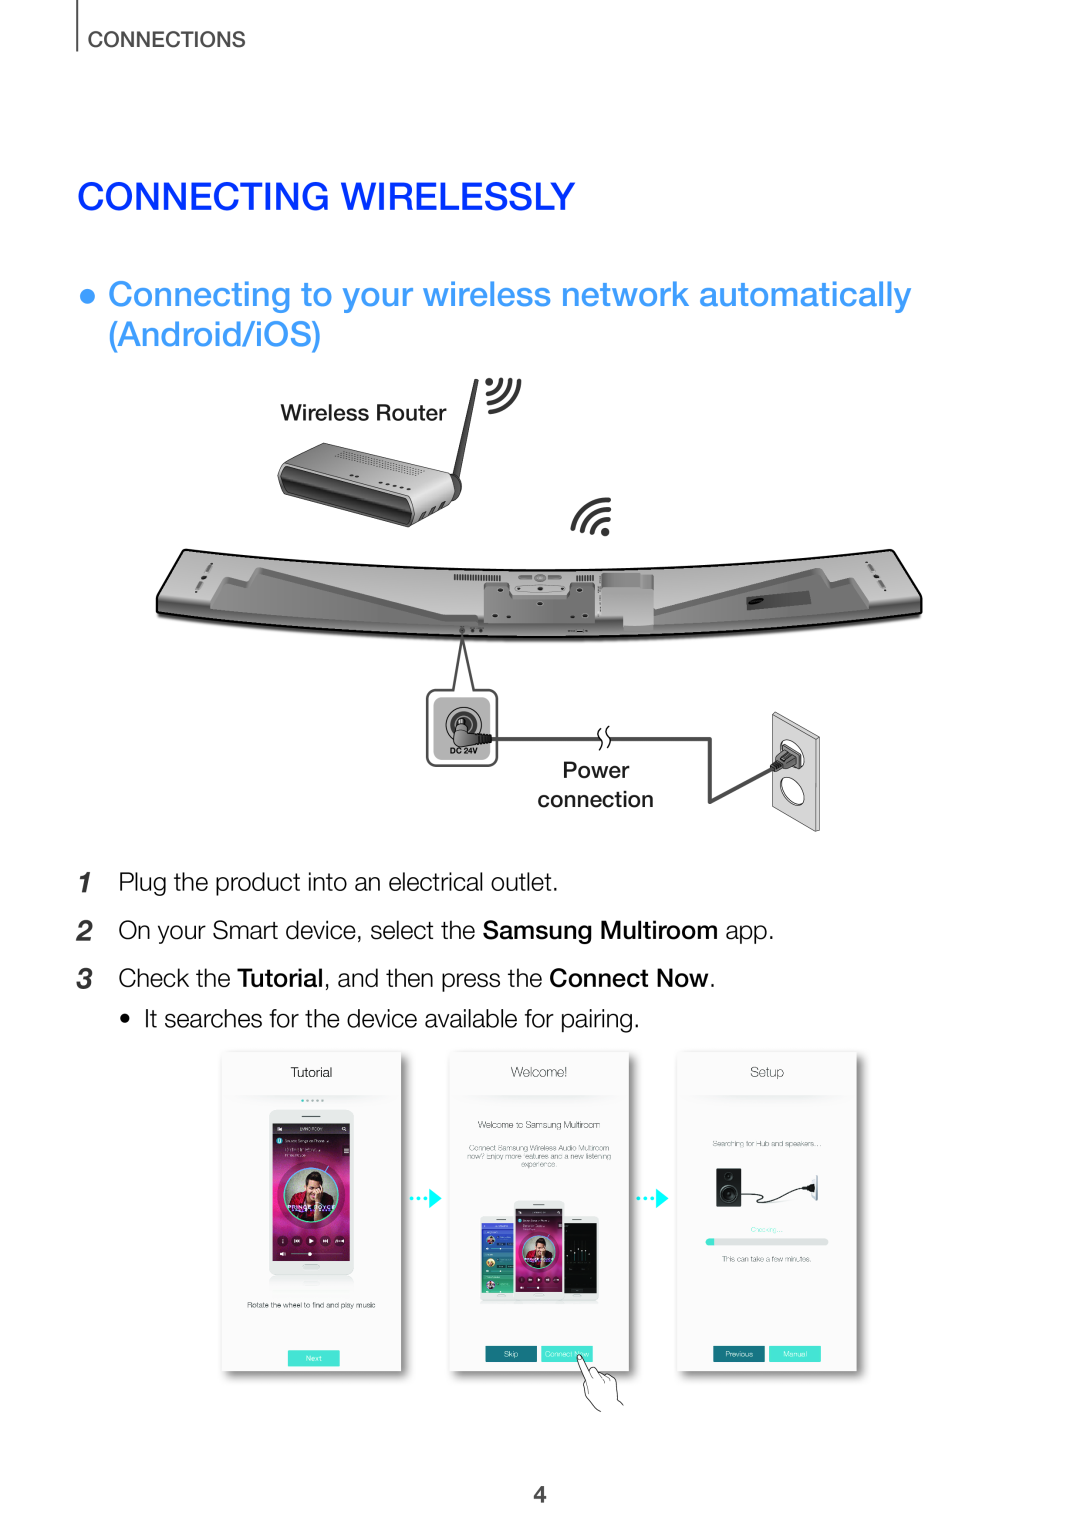 Samsung HW-J650/EN Connecting Wirelessly, Connecting to your wireless network automatically Android/iOS, Connections, 5A.0 